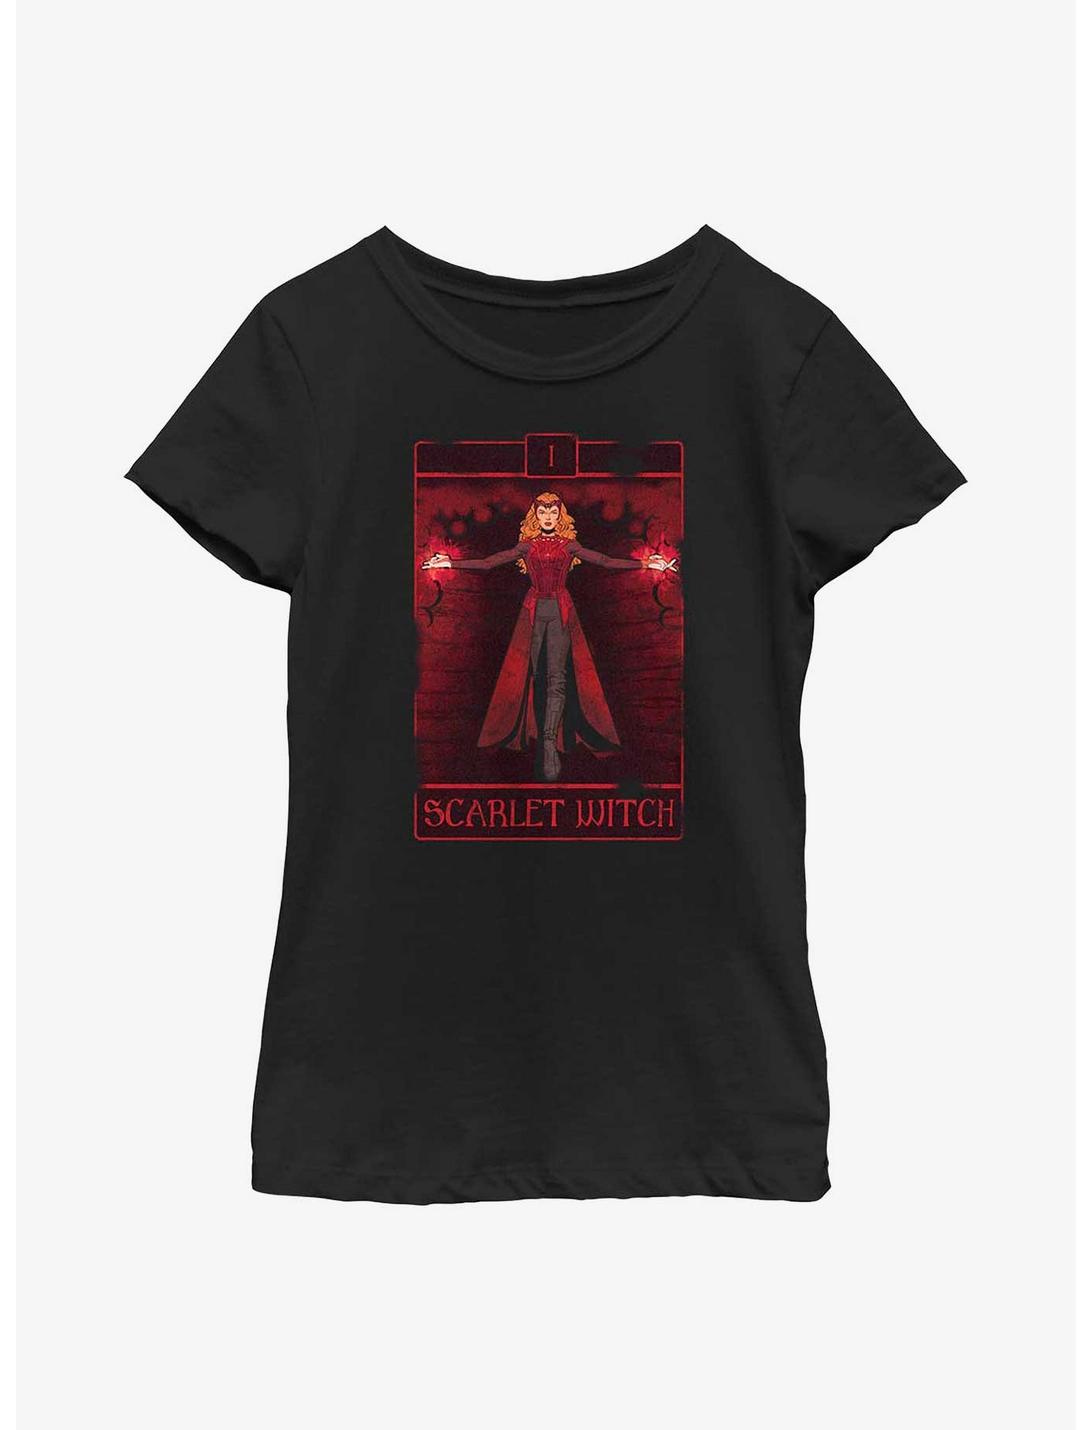 Marvel Doctor Strange In The Multiverse Of Madness Scarlet Witch Tarot Youth Girls T-Shirt, BLACK, hi-res